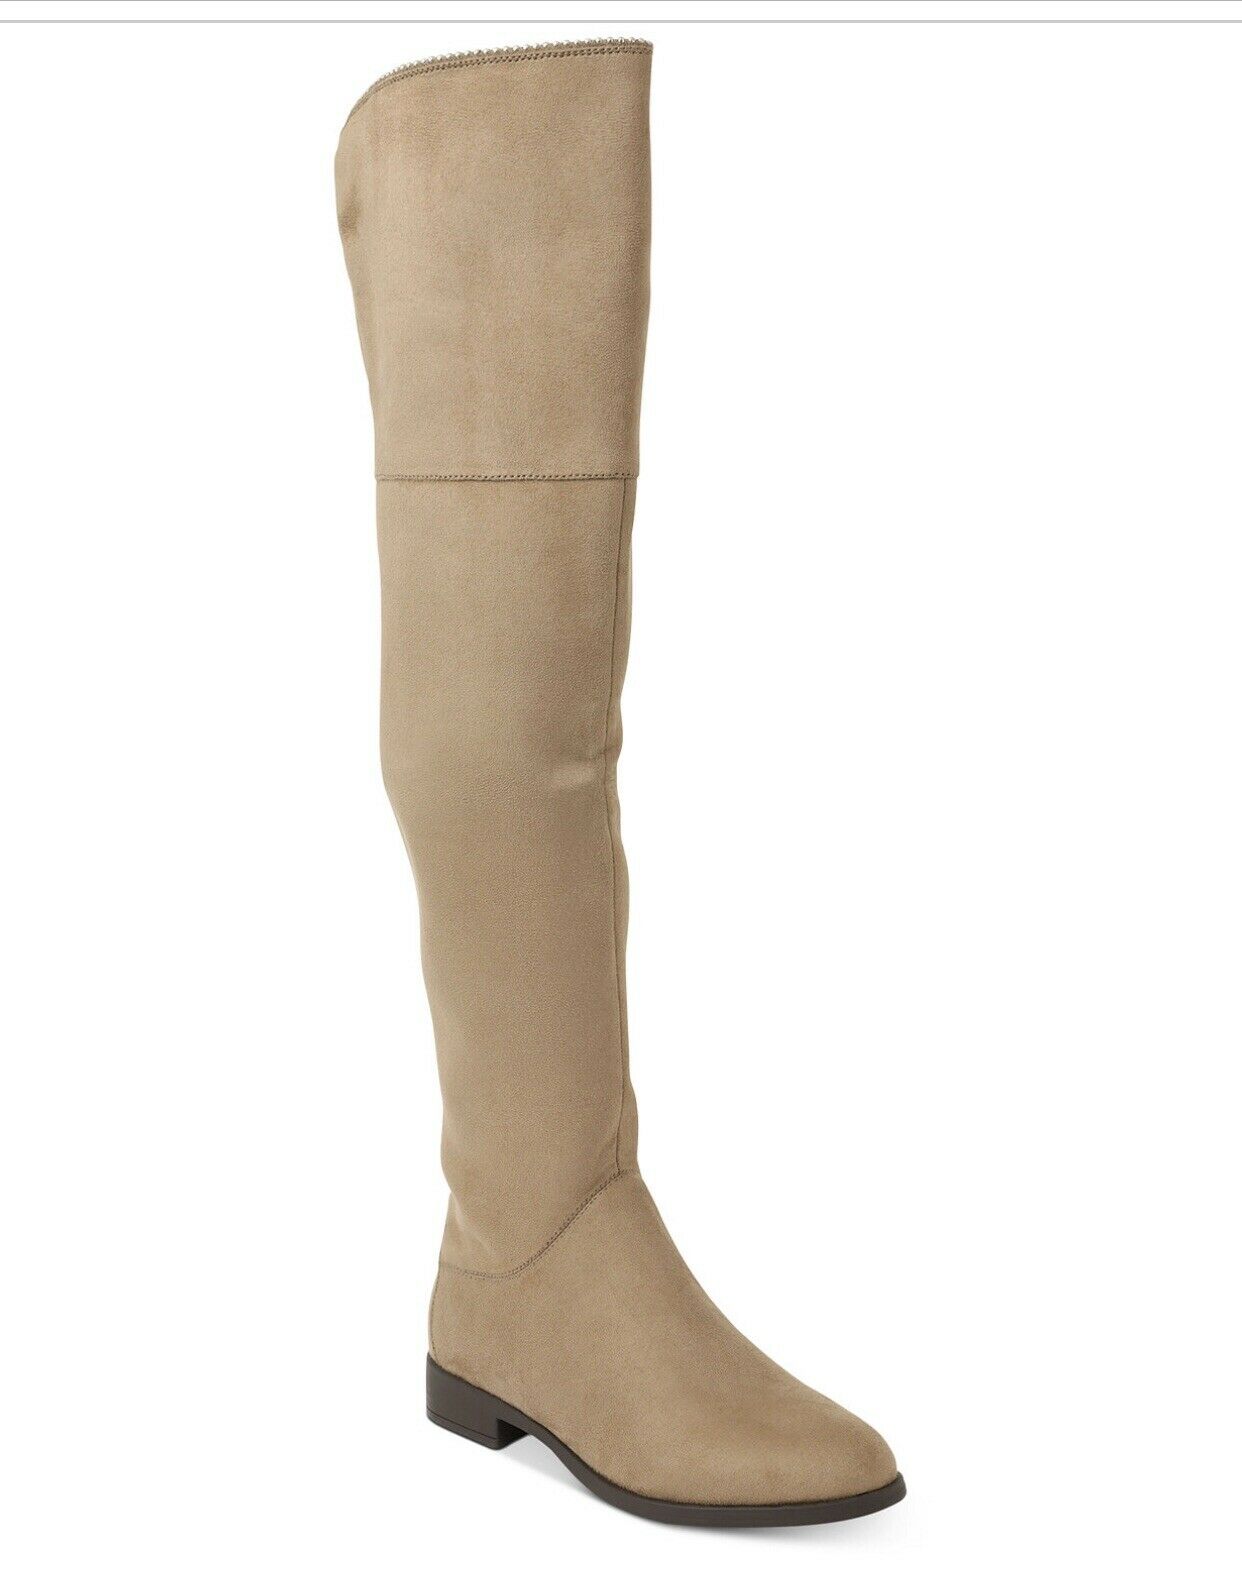 Xoxo Tristen Women Shoes Taupe Over-the-Knee Boot Black Sz 8 M